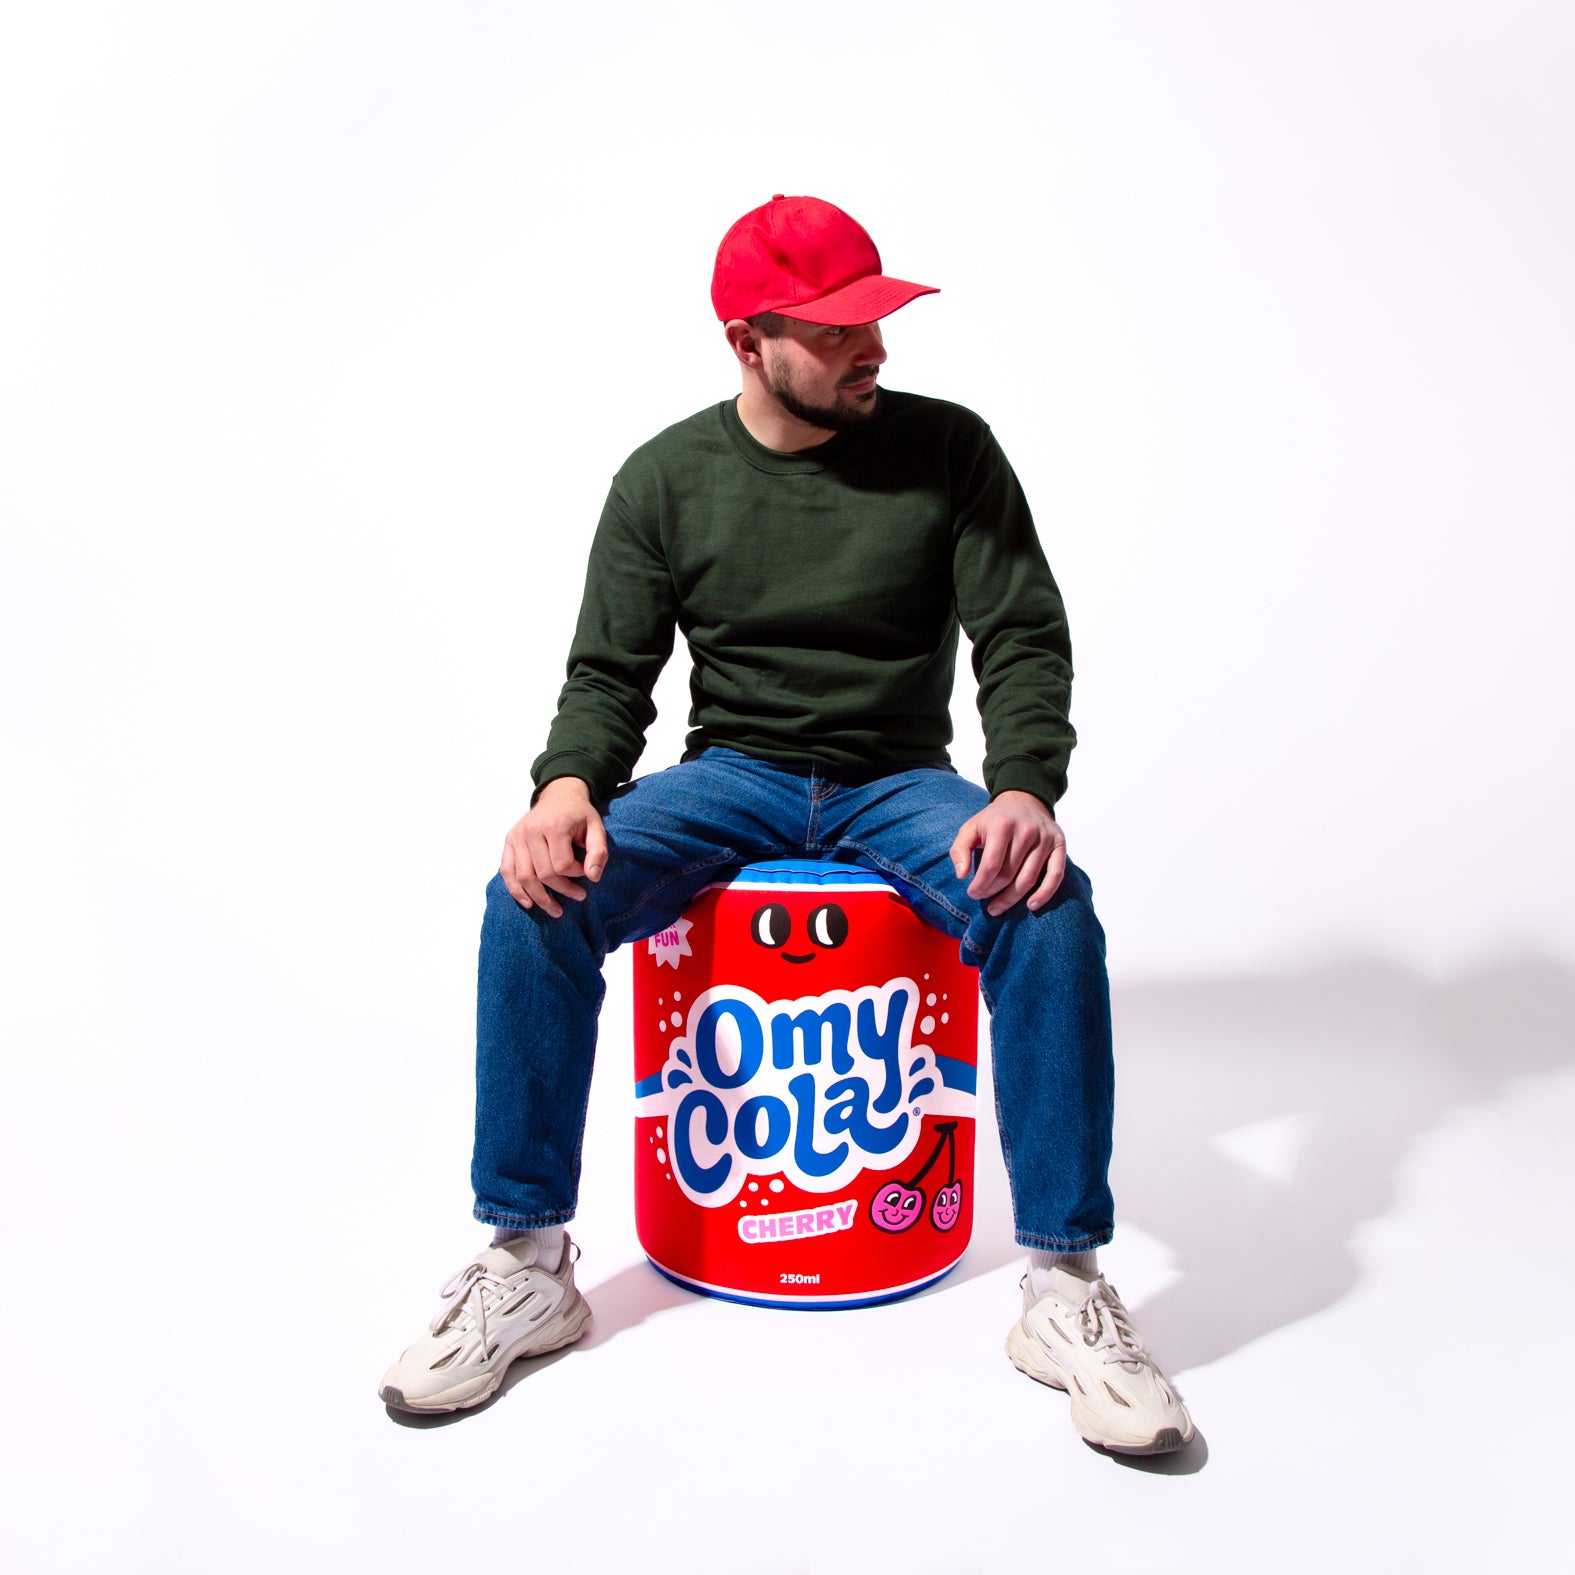 OMY Cola - Giant inflatable pillow